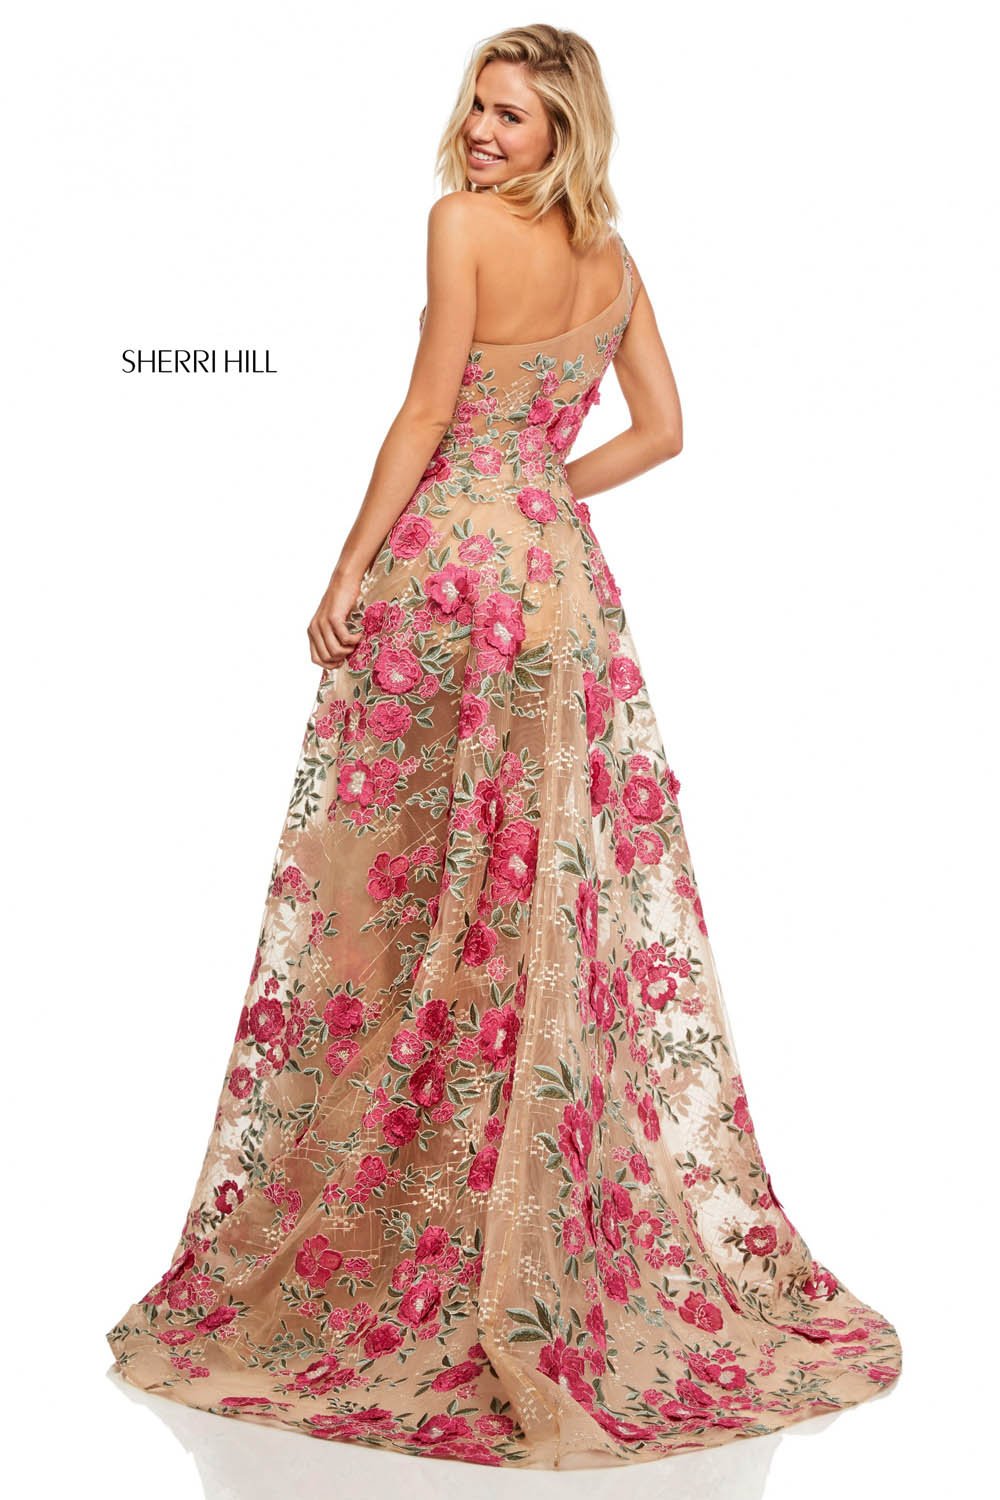 Sherri Hill 52658 dress images in these colors: Nude Fuchsia.